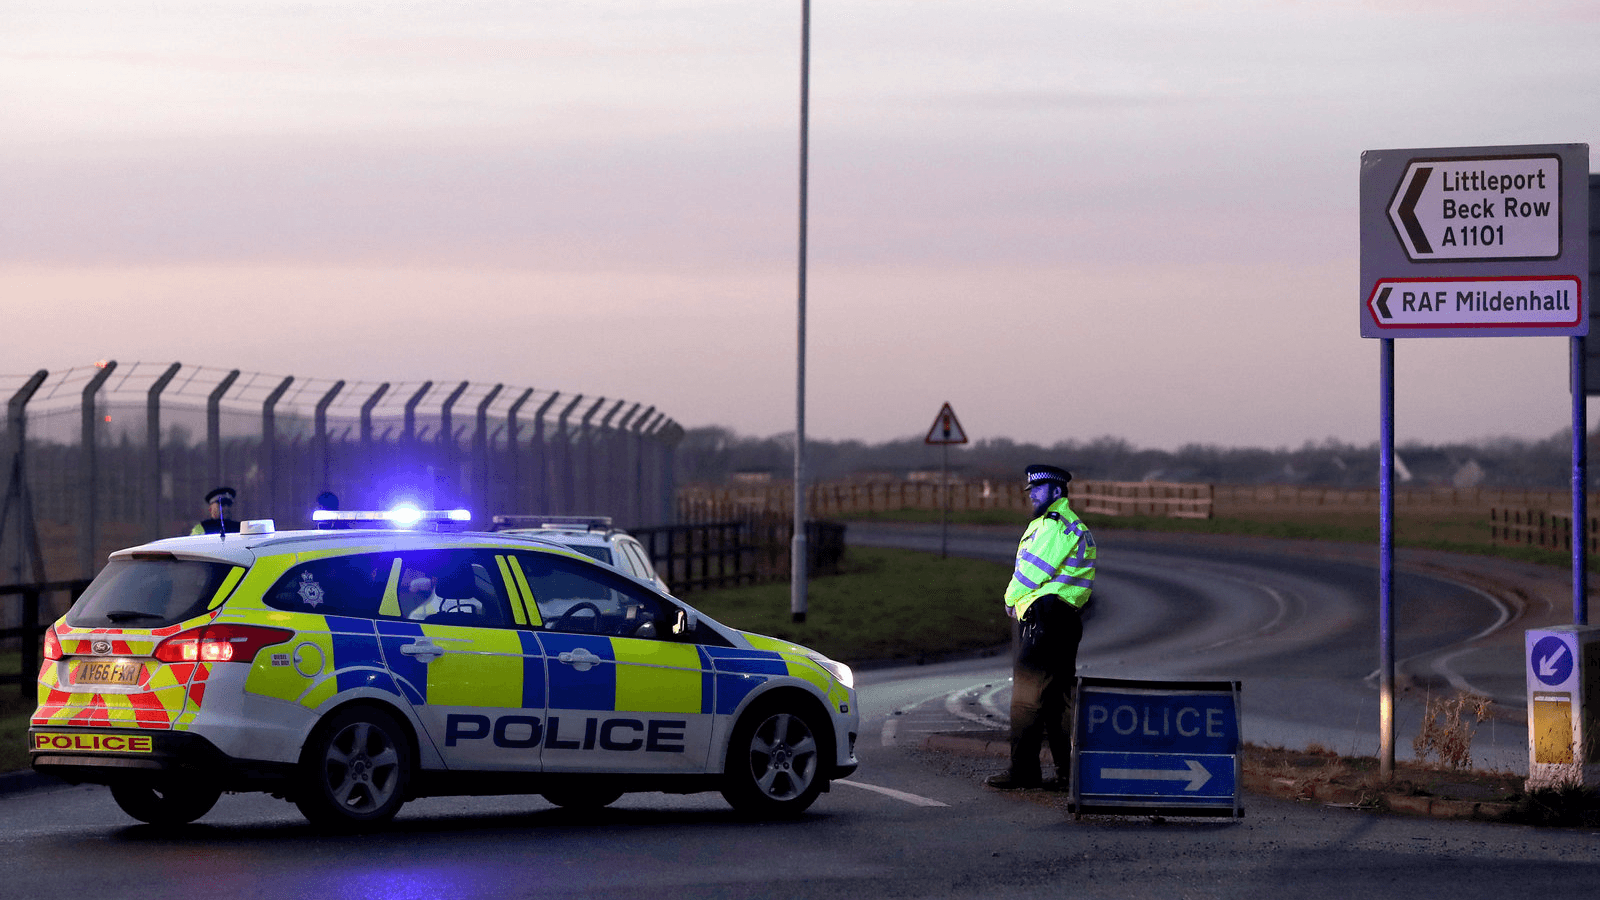 British police stand guard at the entrance to the US Air Force base at RAF Mildenhall, Suffolk, Britain, Dec. 18, 2017.